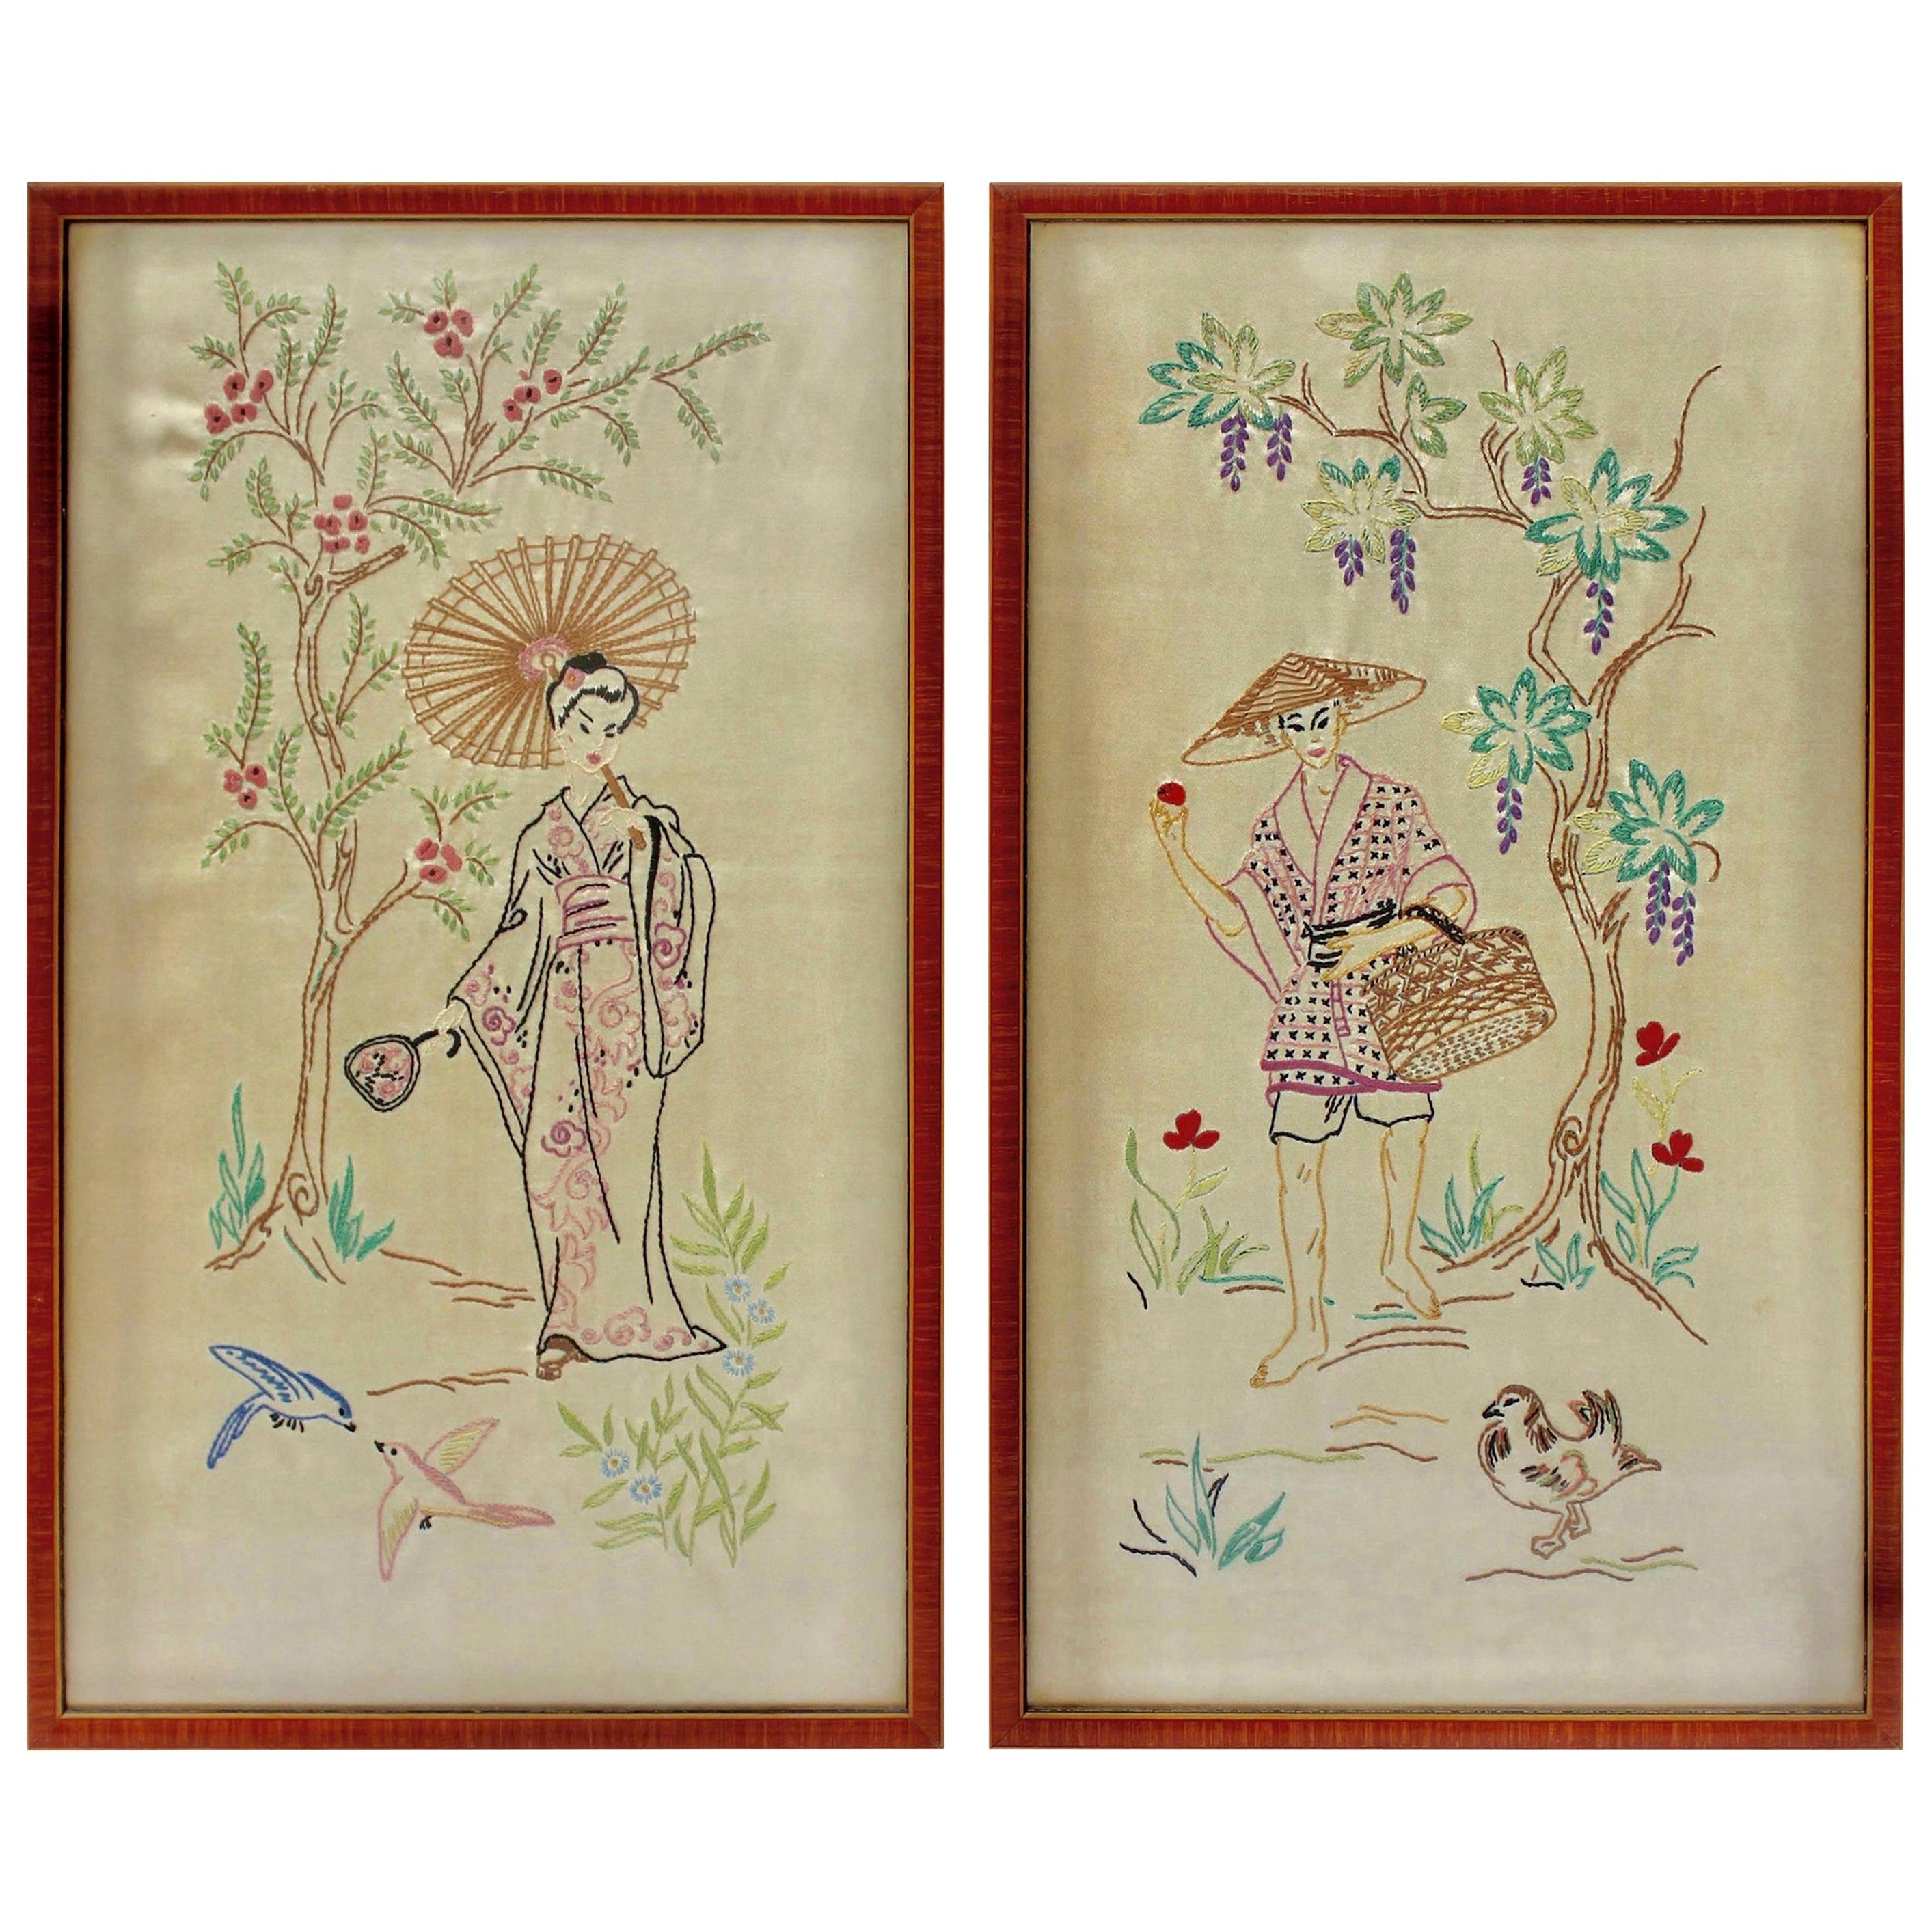 Silk Embroidered Pictures Depicts a Young Lady in an Outdoor Setting